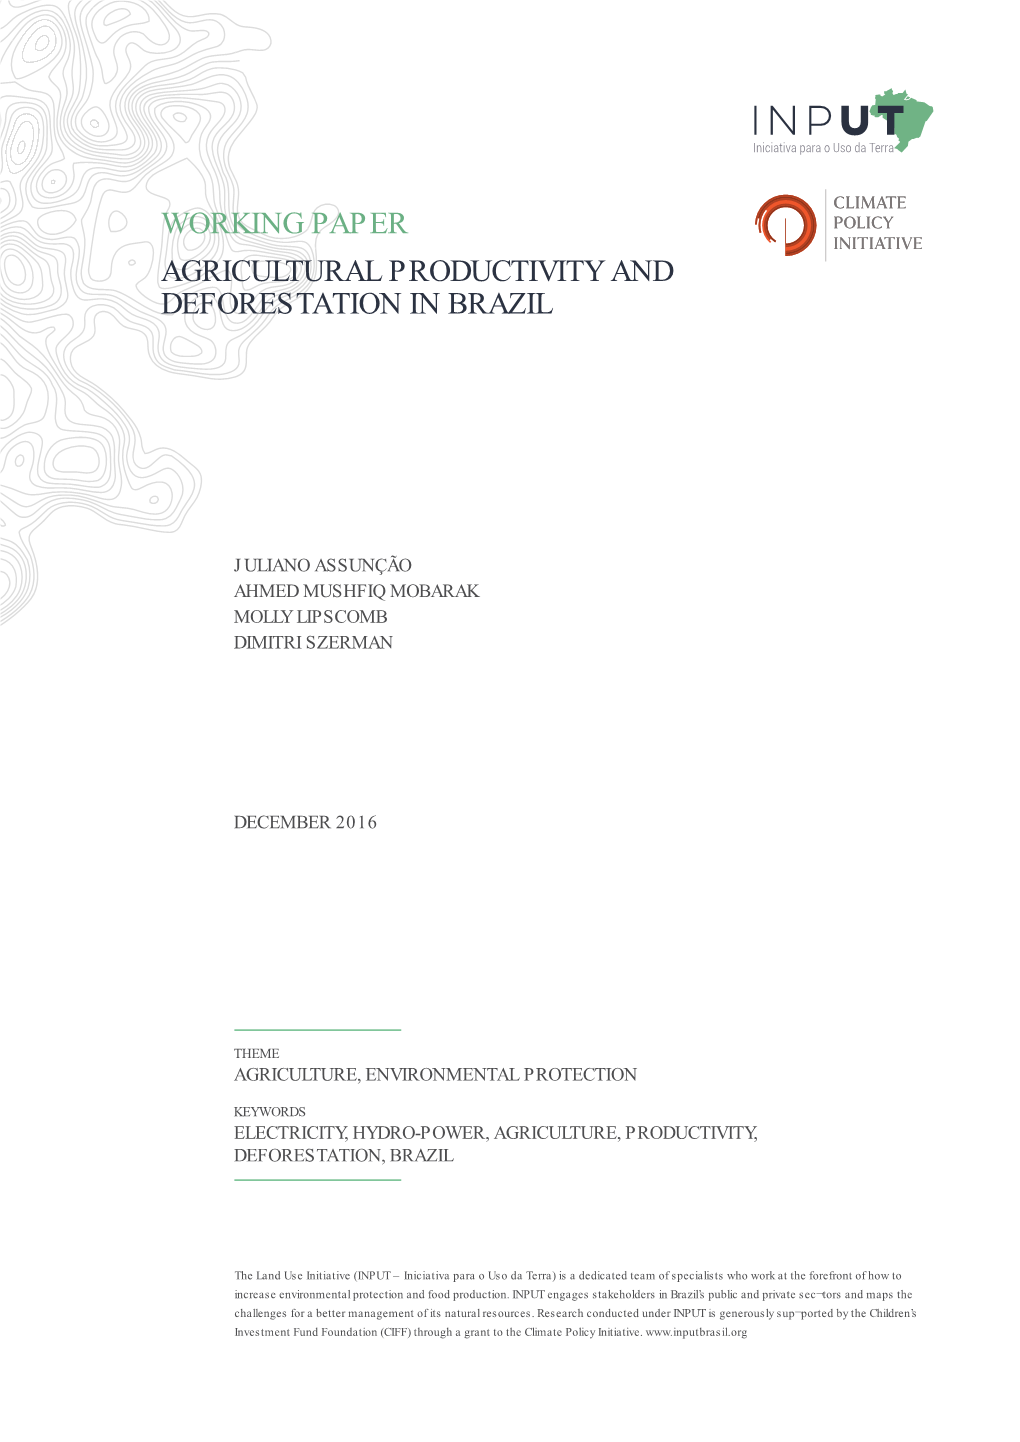 Agricultural Productivity and Deforestation in Brazil